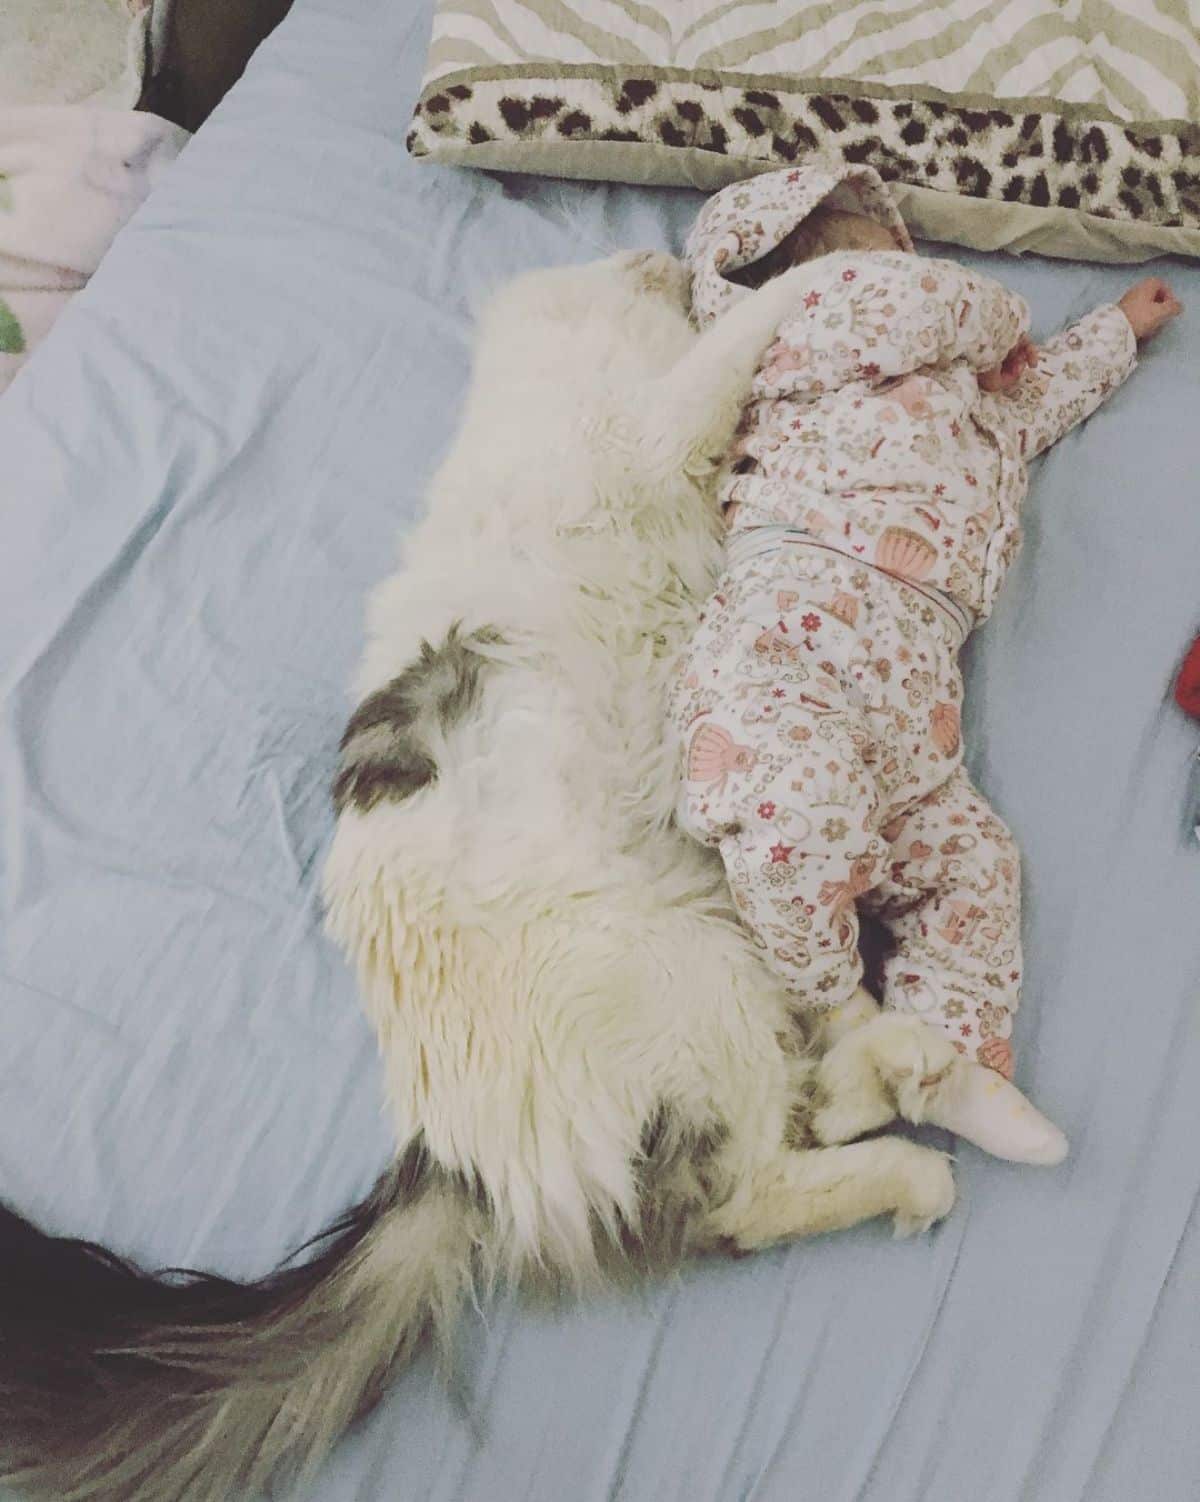 A baby and a white-gray maine coon sleeping together on a bed.